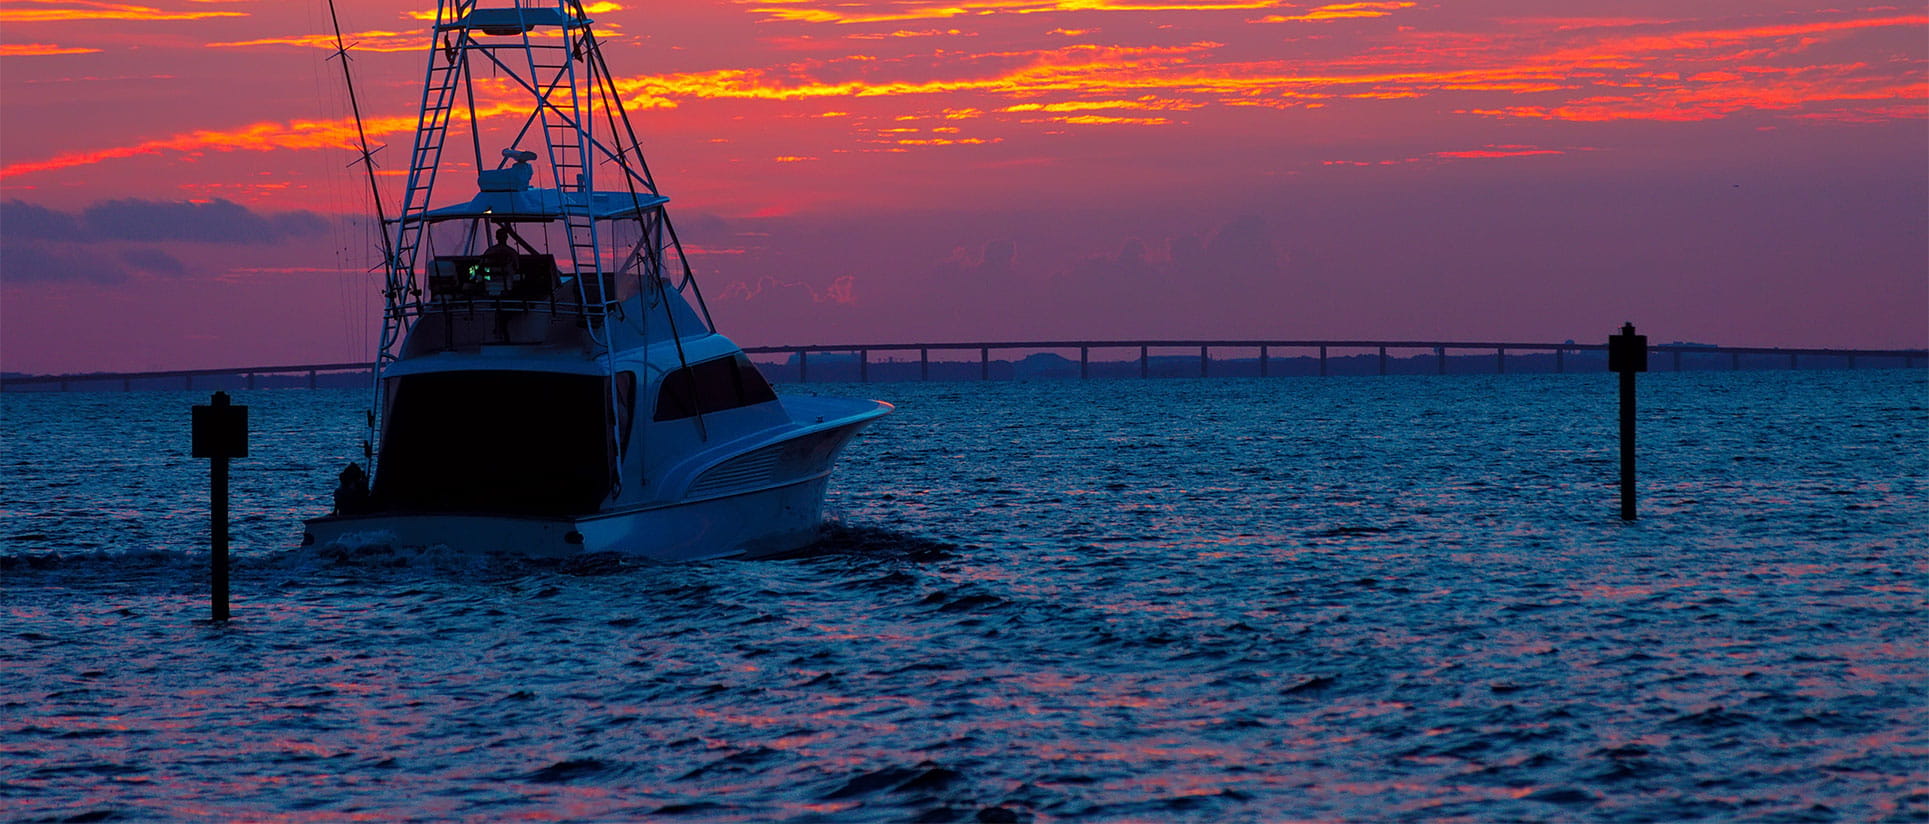 Homepage banner image - boat on the water at sunset